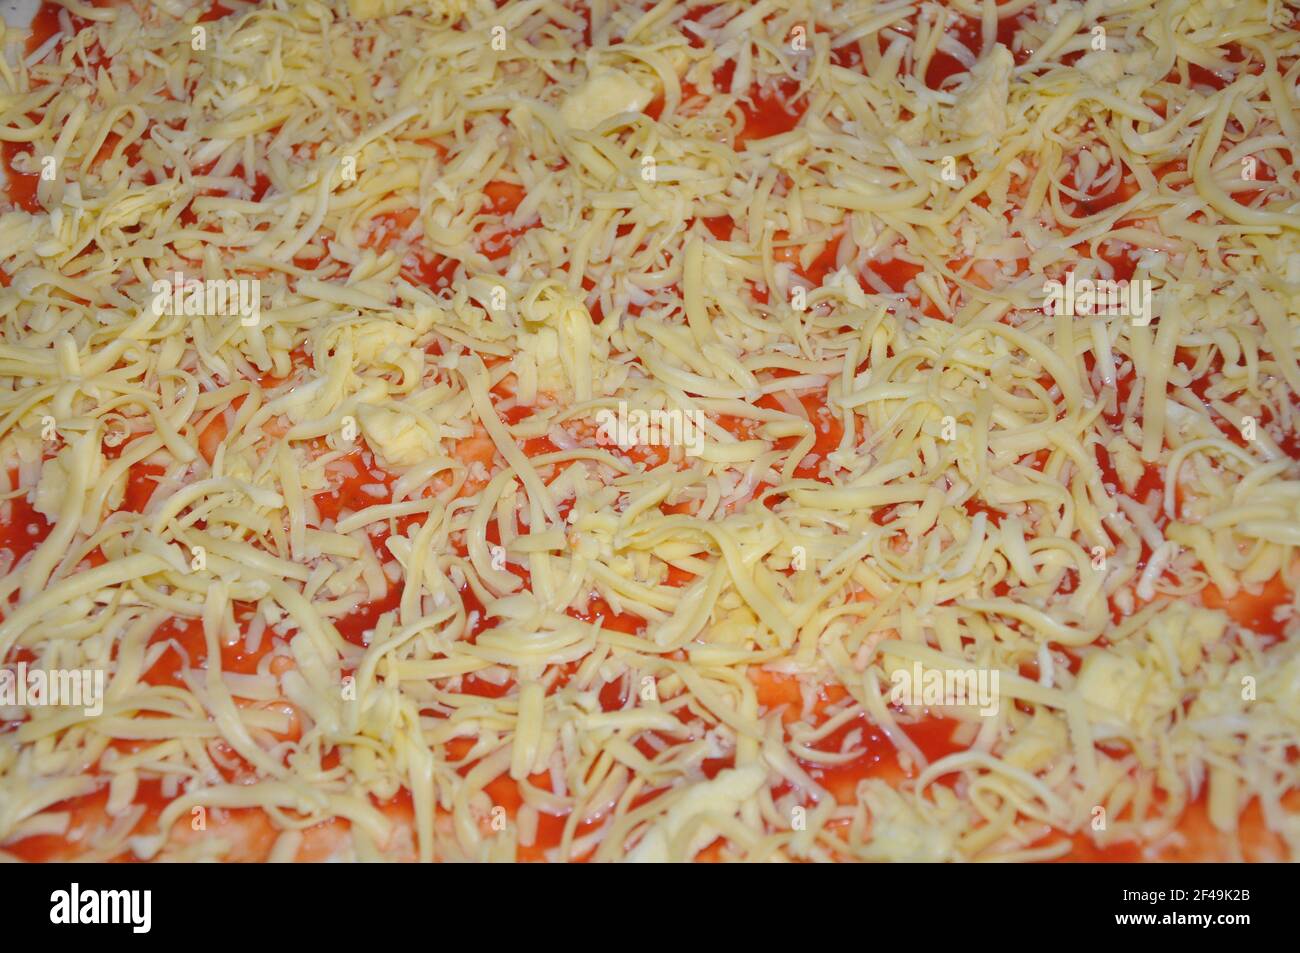 Background texture of unbaked mozzarella on a pizza. Image of unbaked pizza with ham and chees, close-up Stock Photo